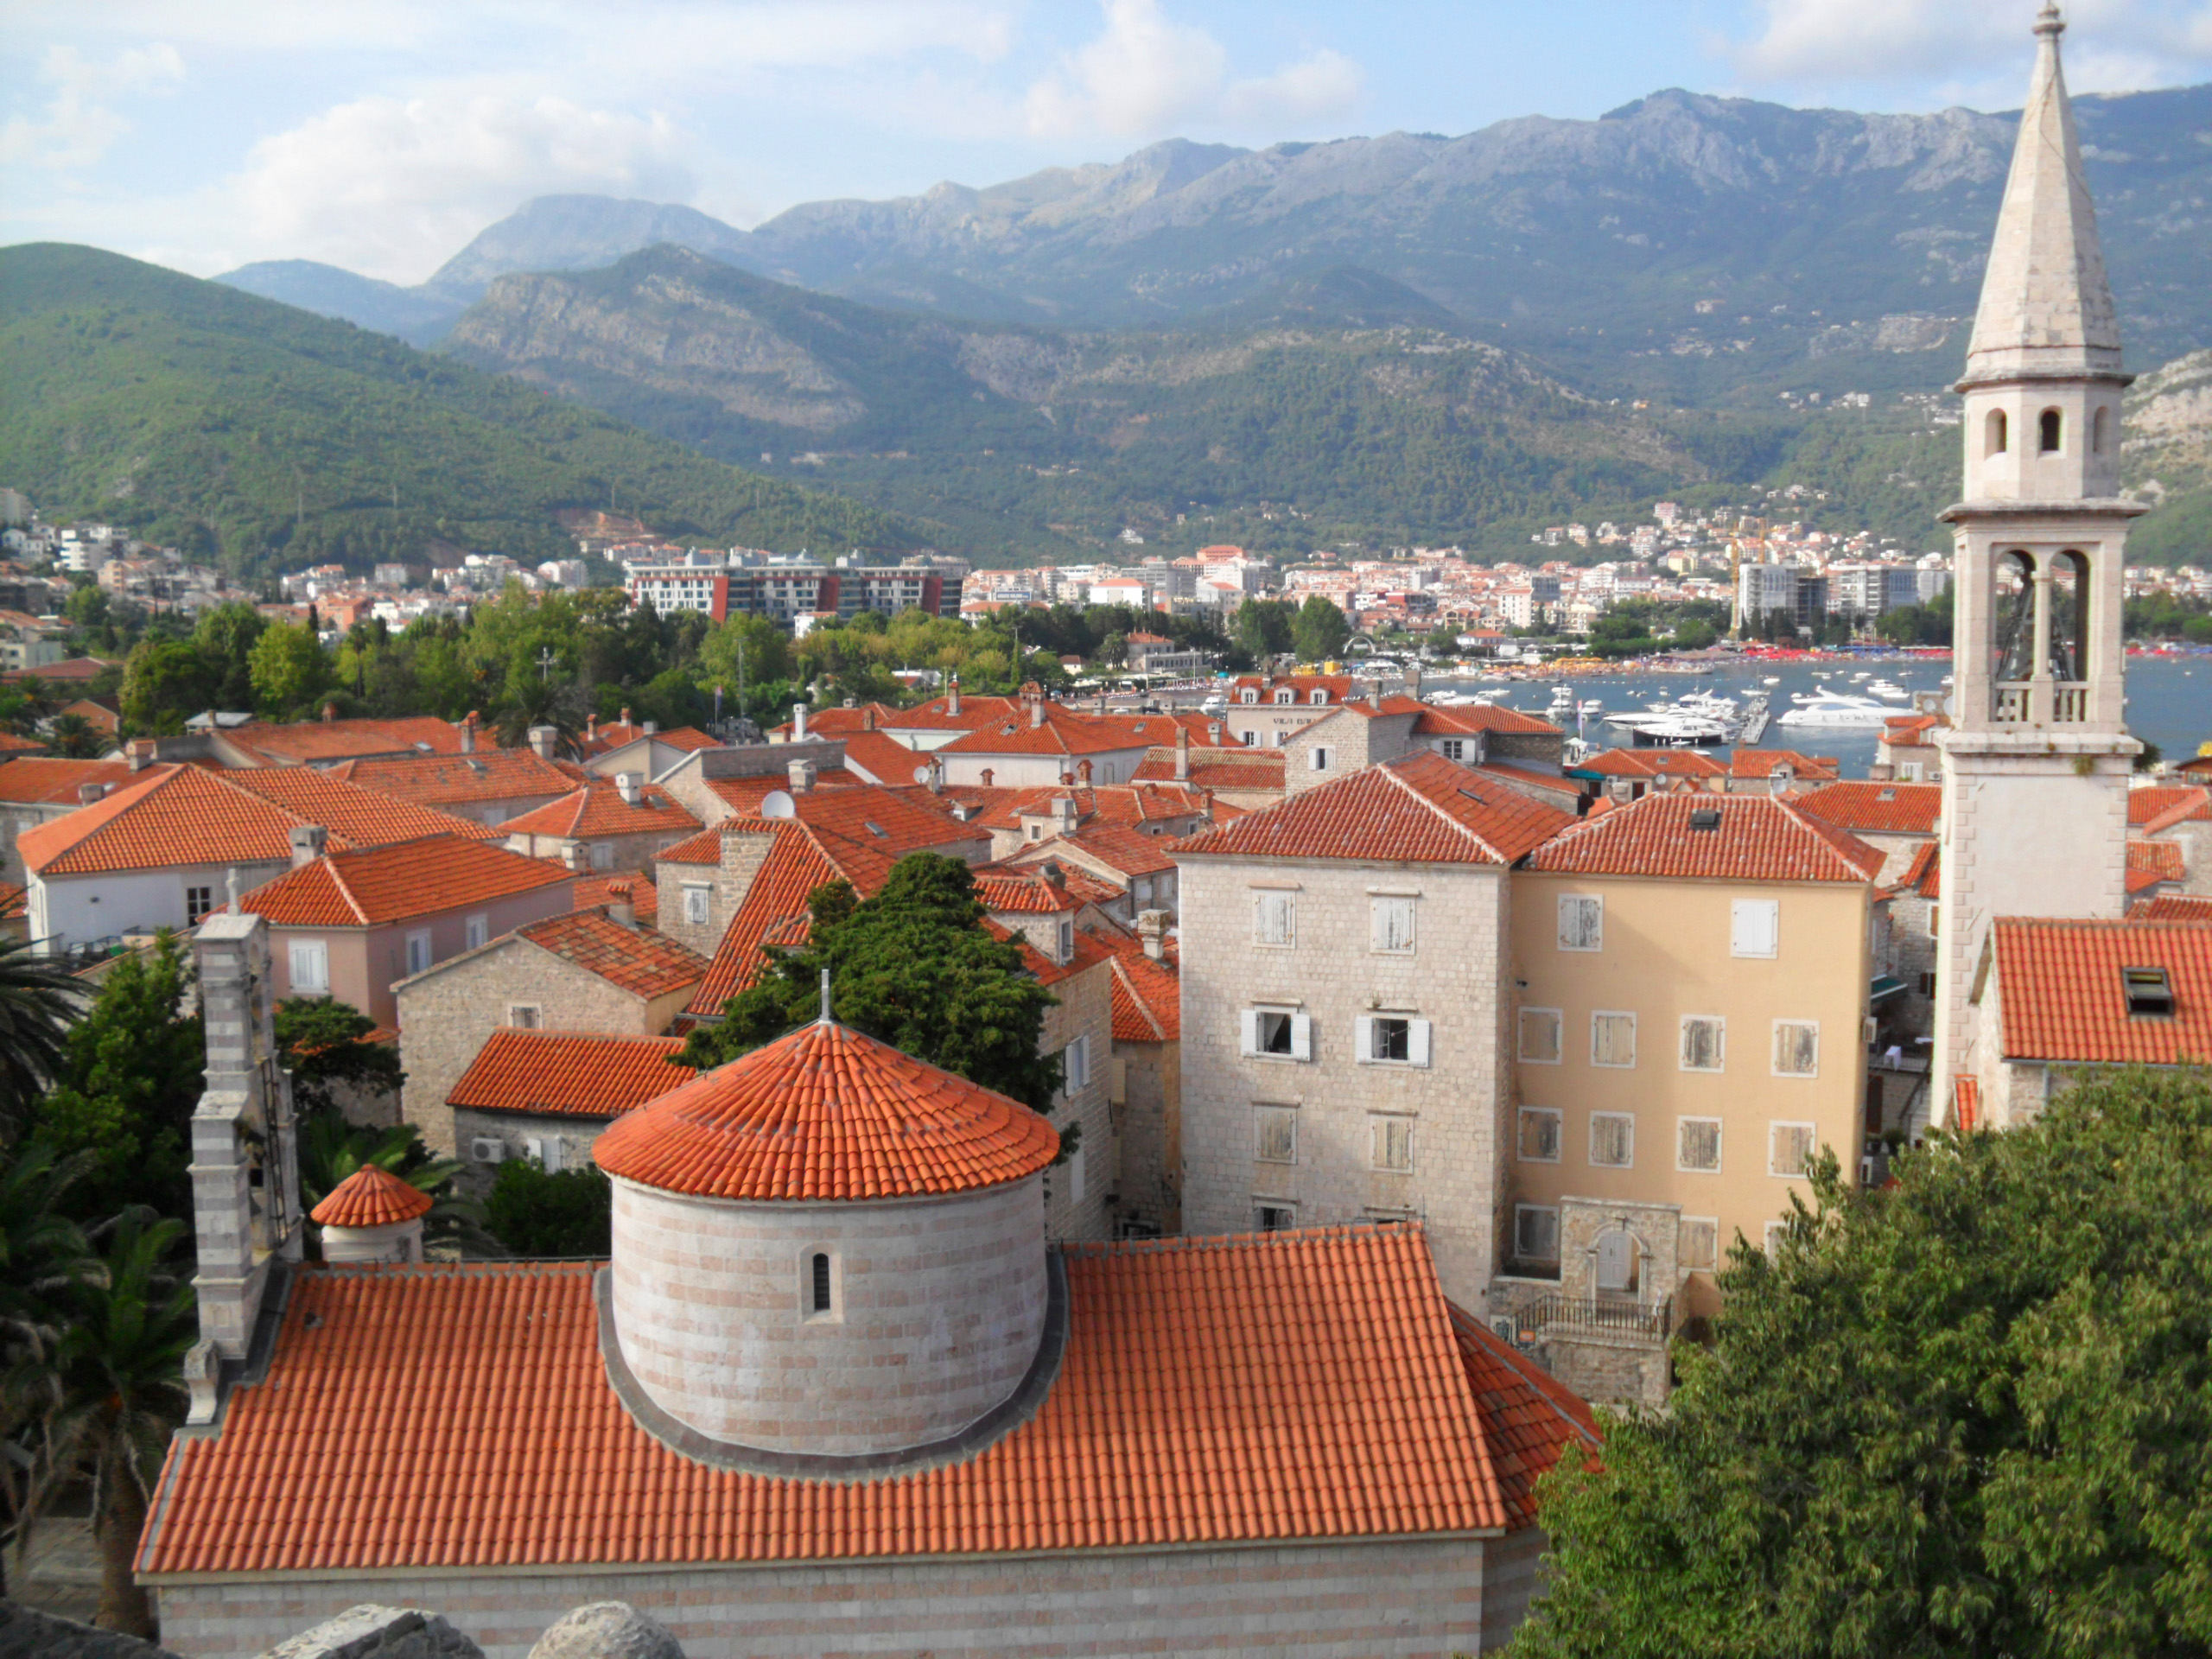 View over the Old Town of Budva from the Citadel